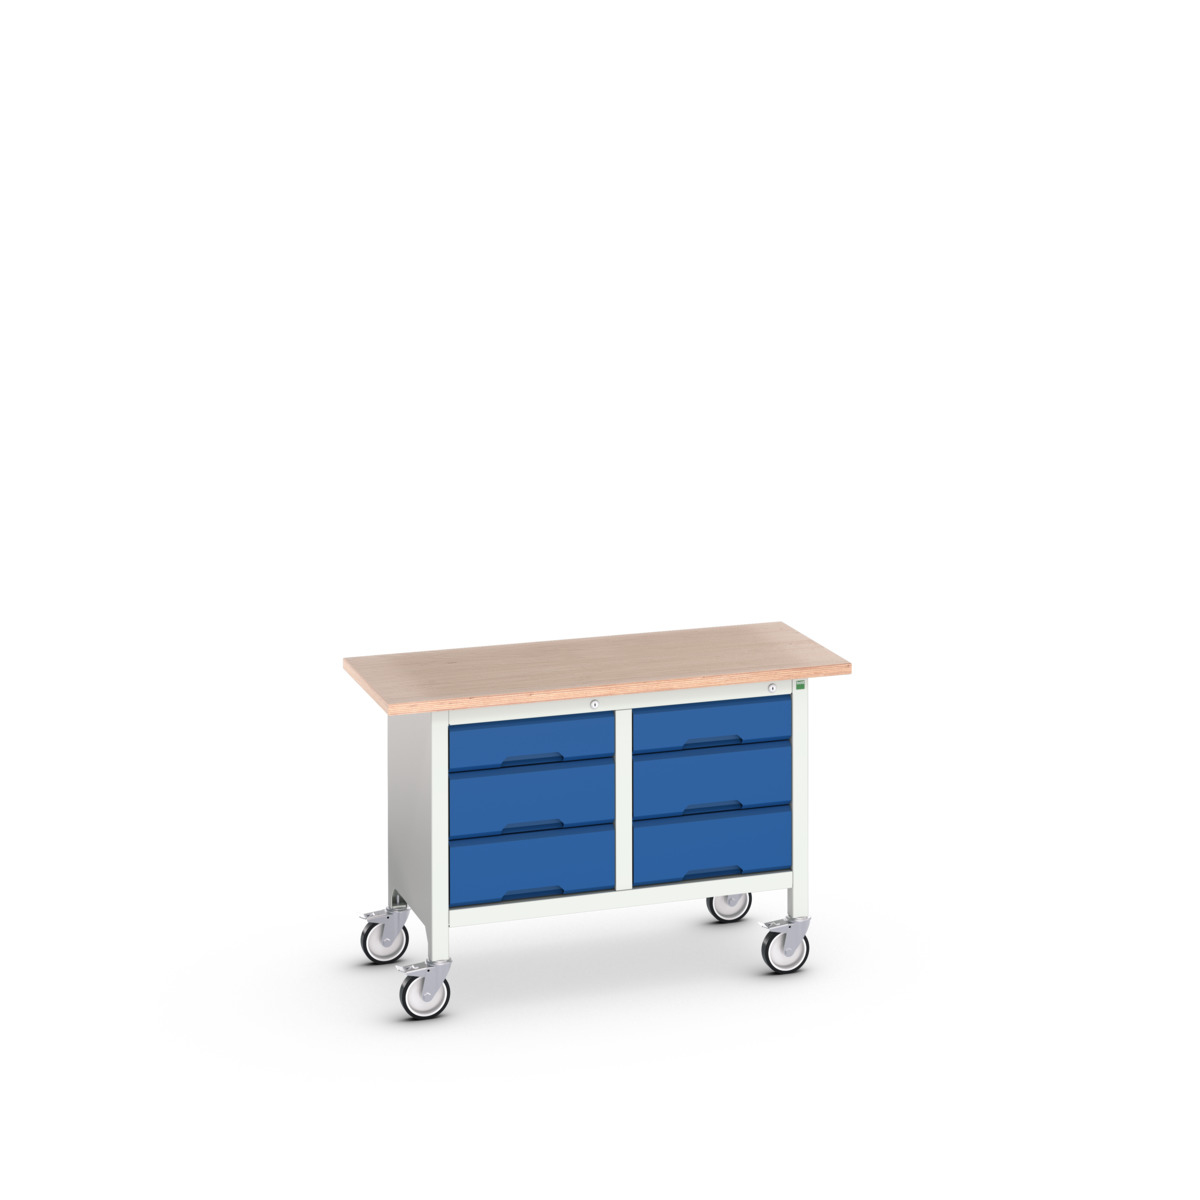 16923204.11 - verso mobile storage bench (mpx)